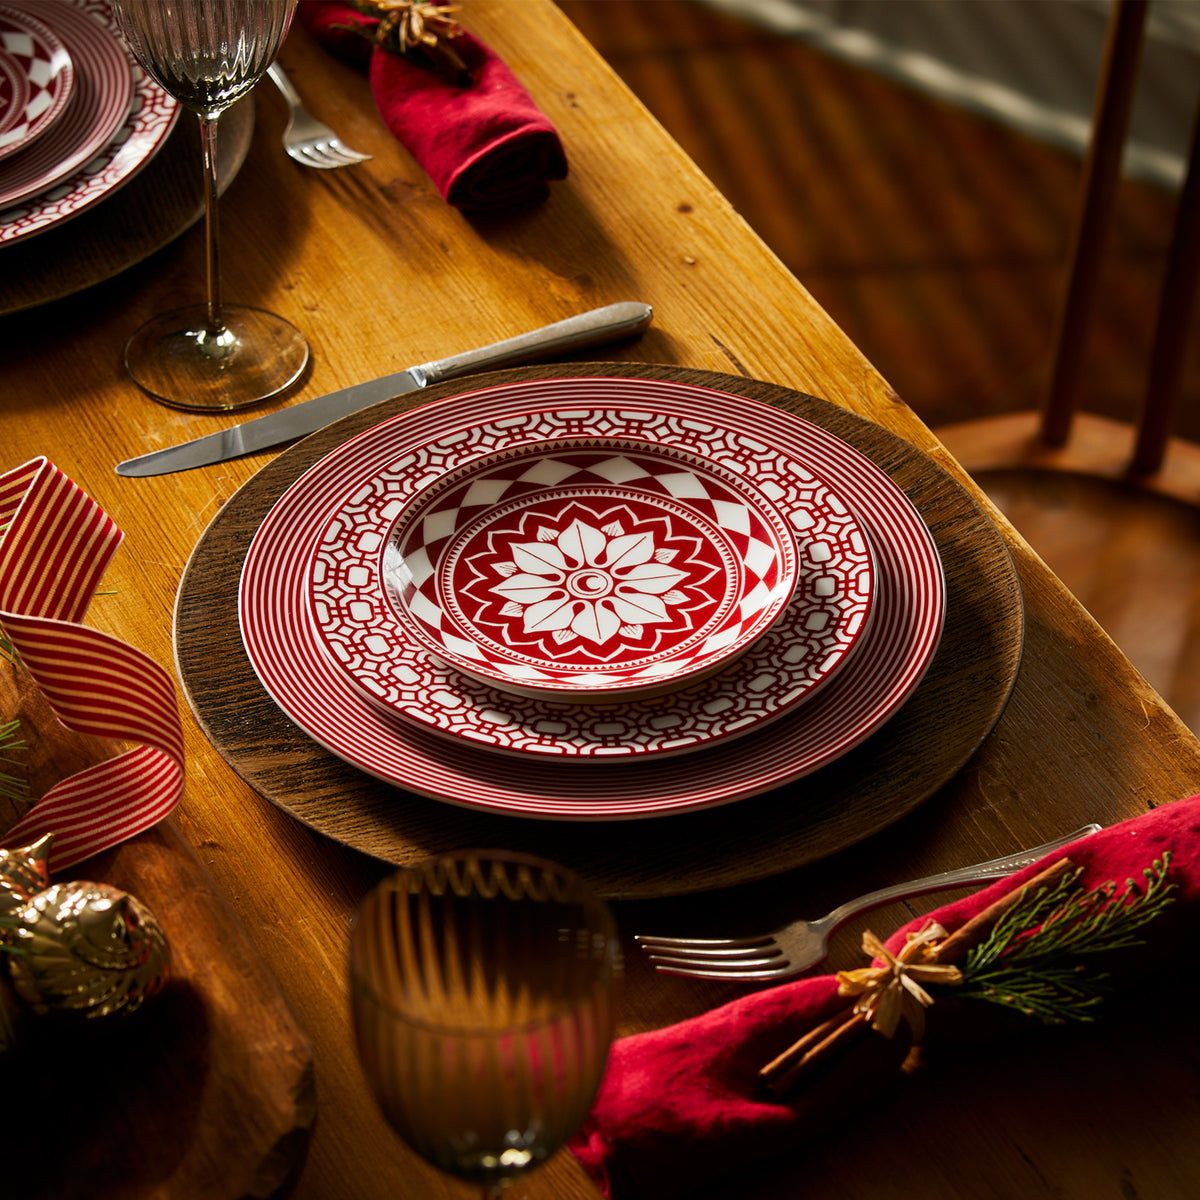 A dining table set with red and white patterned plates, including Caskata Artisanal Home Newport Garden Gate Crimson Rimmed Salad Plates, complemented by red napkins with festive decorations, wine glasses, and silverware.